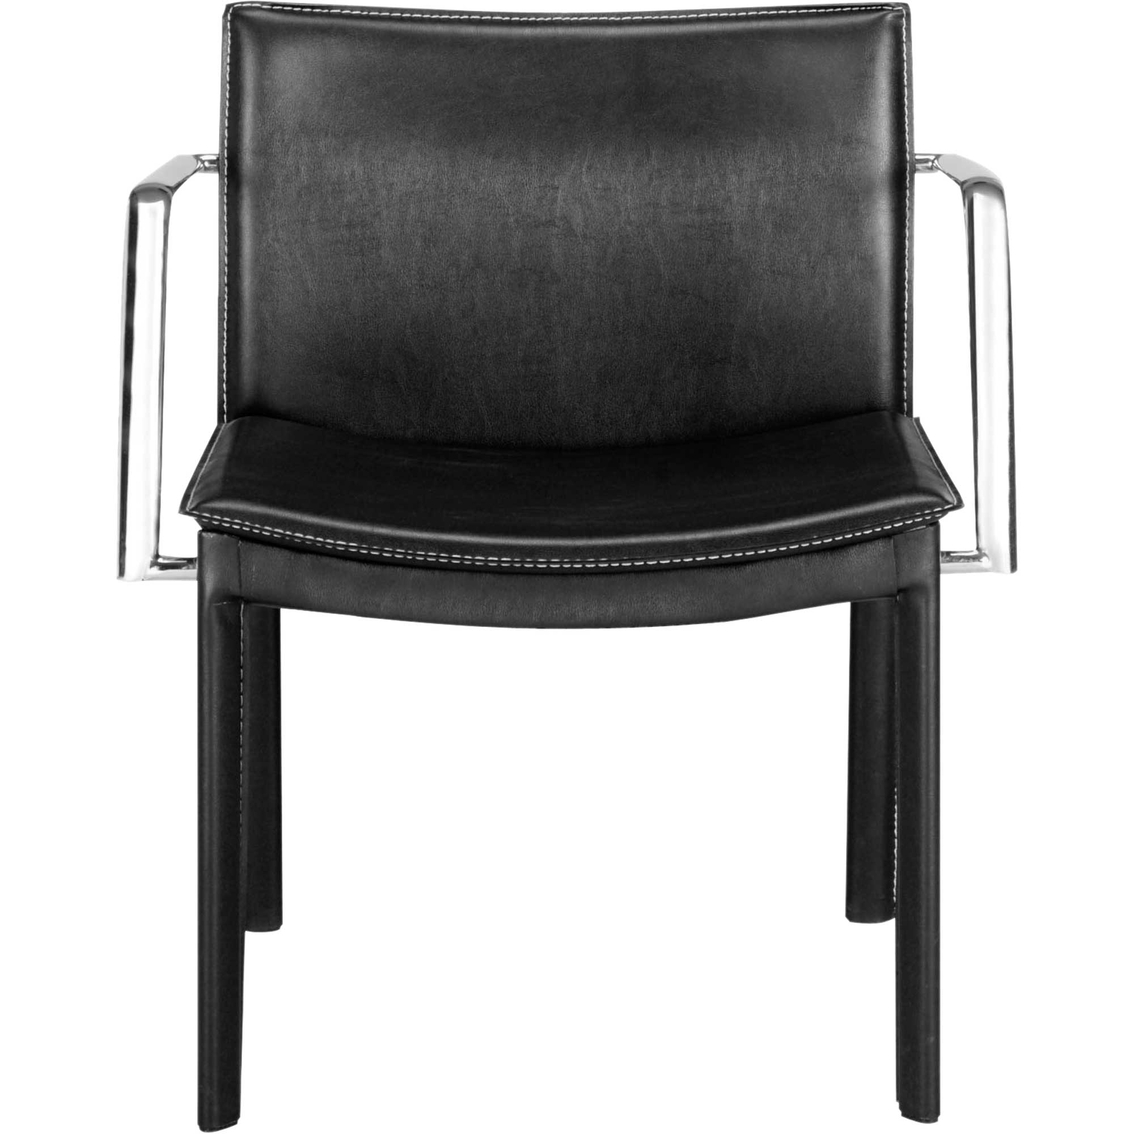 Zuo Gekko Conference Chair 2 Pk. - Image 3 of 7